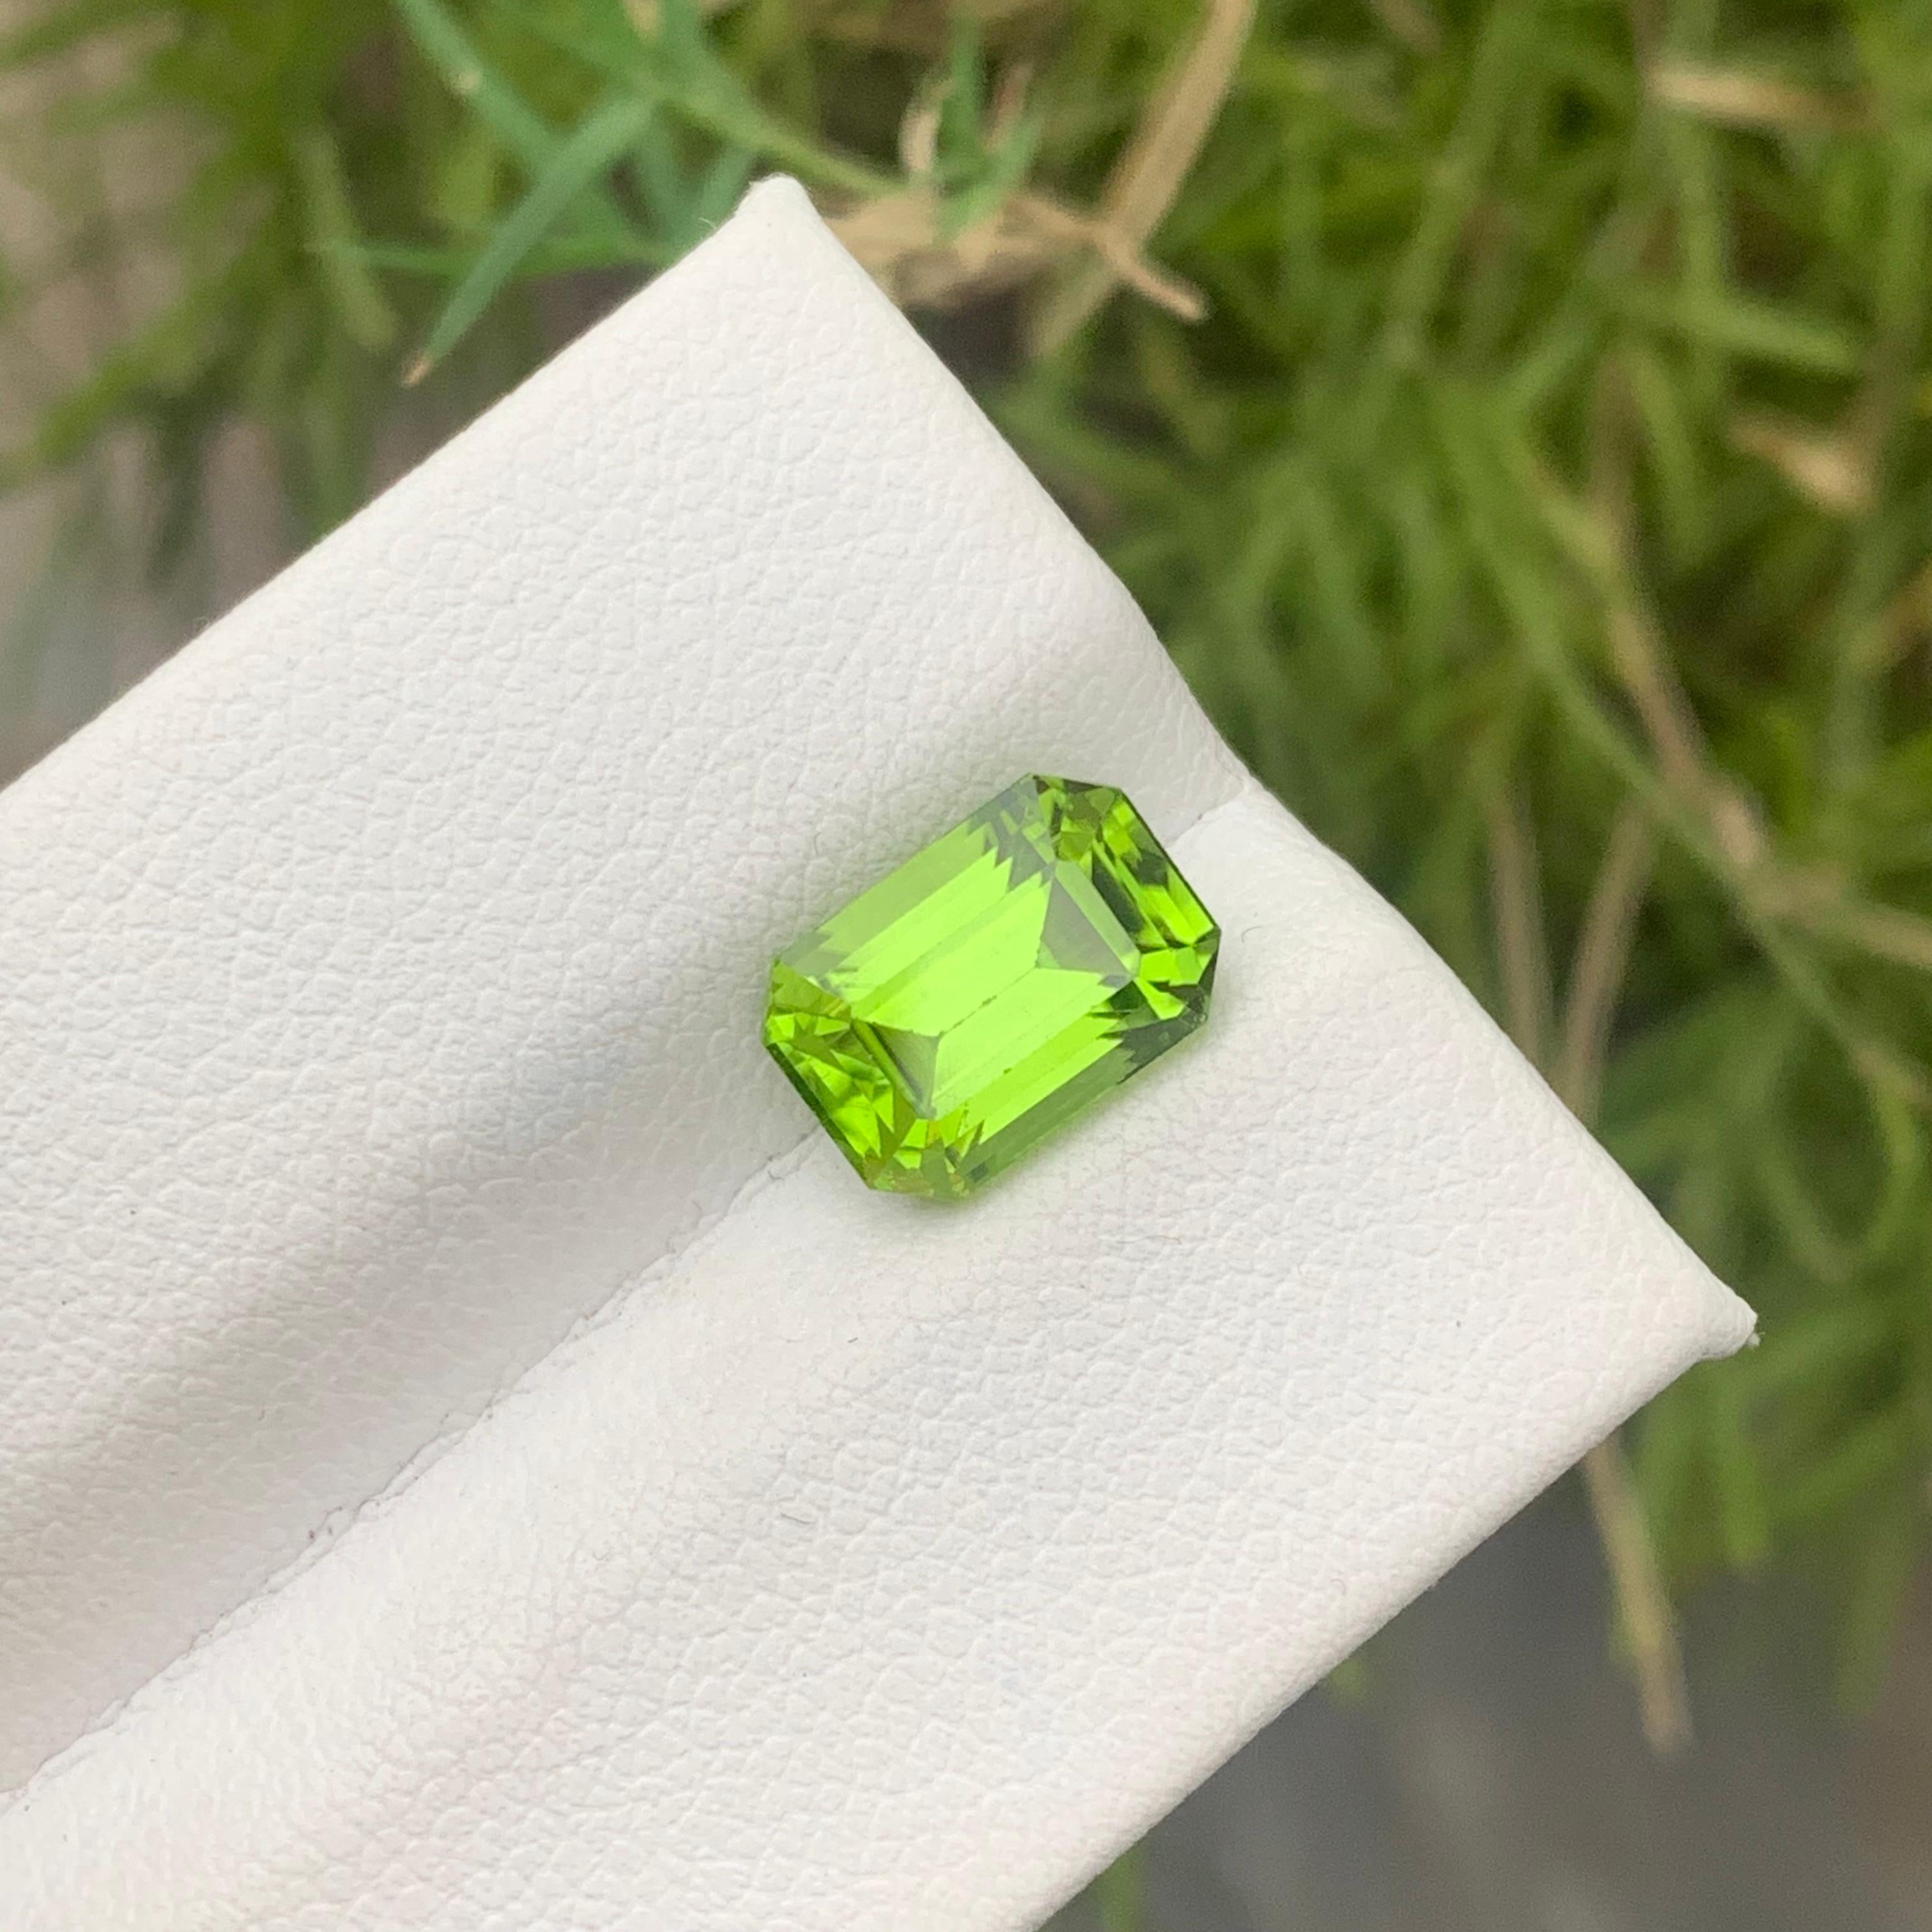 Gorgeous 3.35 Carat Natural Loose Green Peridot Gemstone from Pakistani Mine For Sale 1